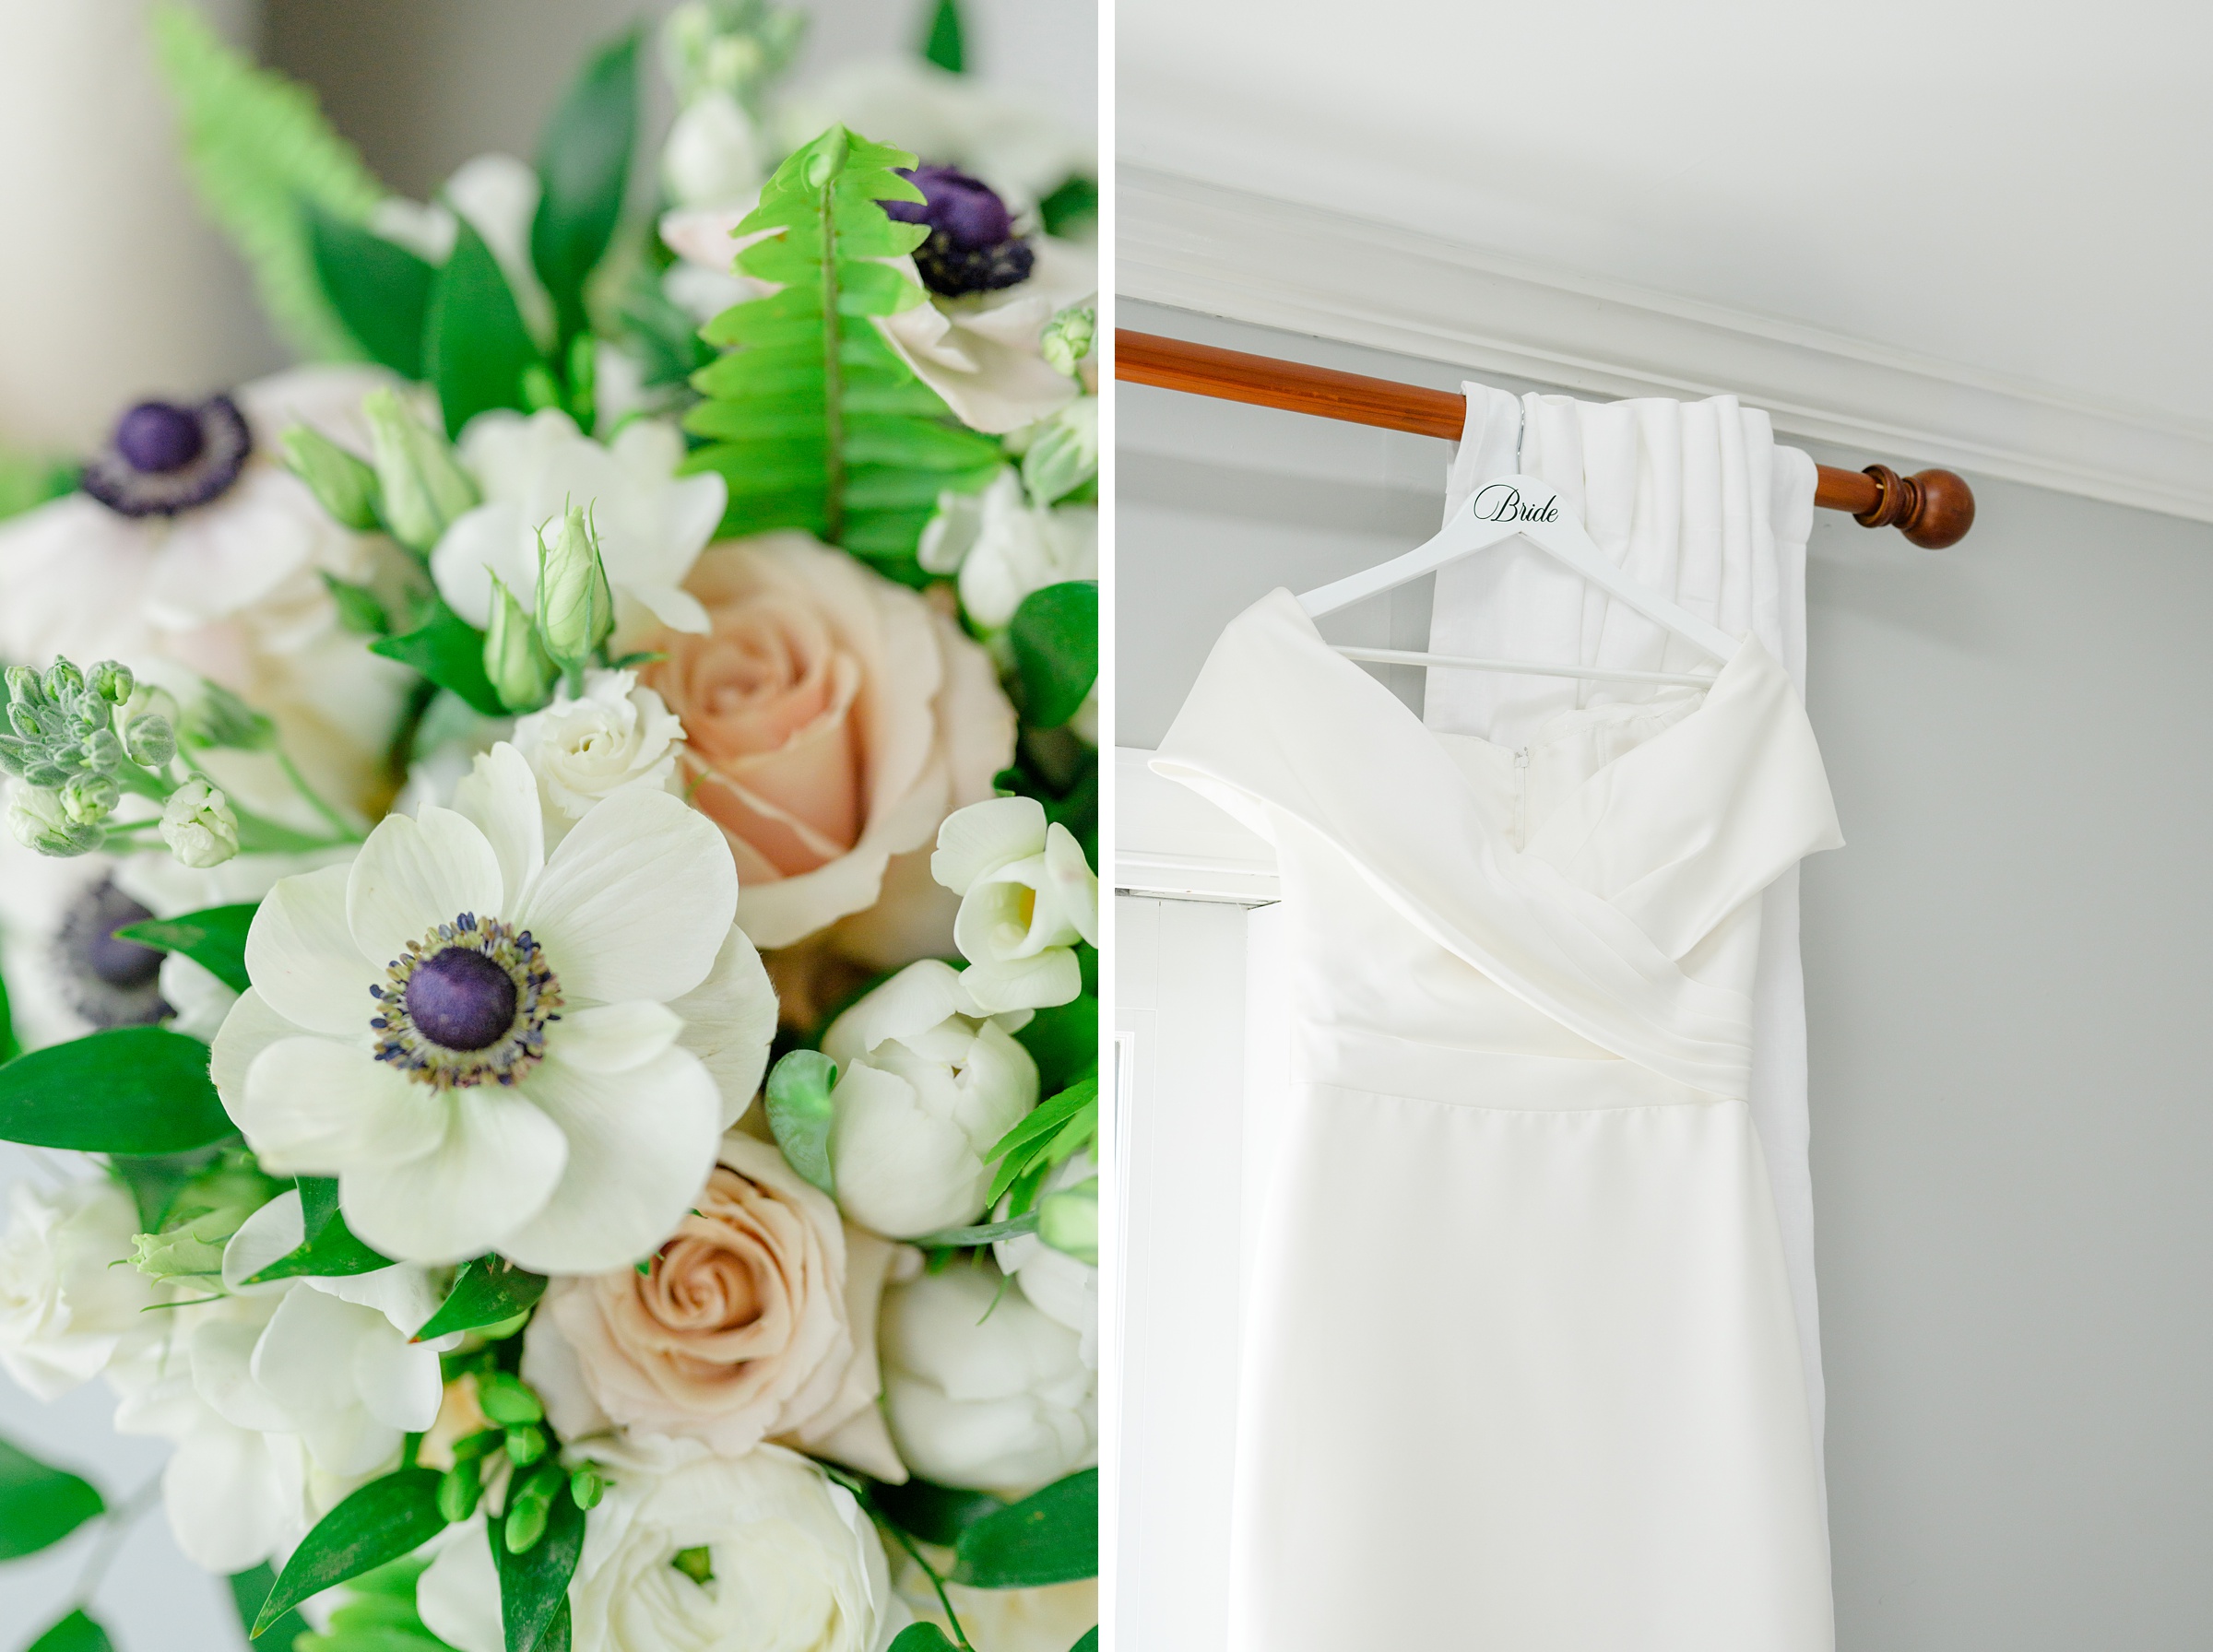 Spring wedding at the Philadelphia Cricket Club photographed by Baltimore Photographer Cait Kramer.